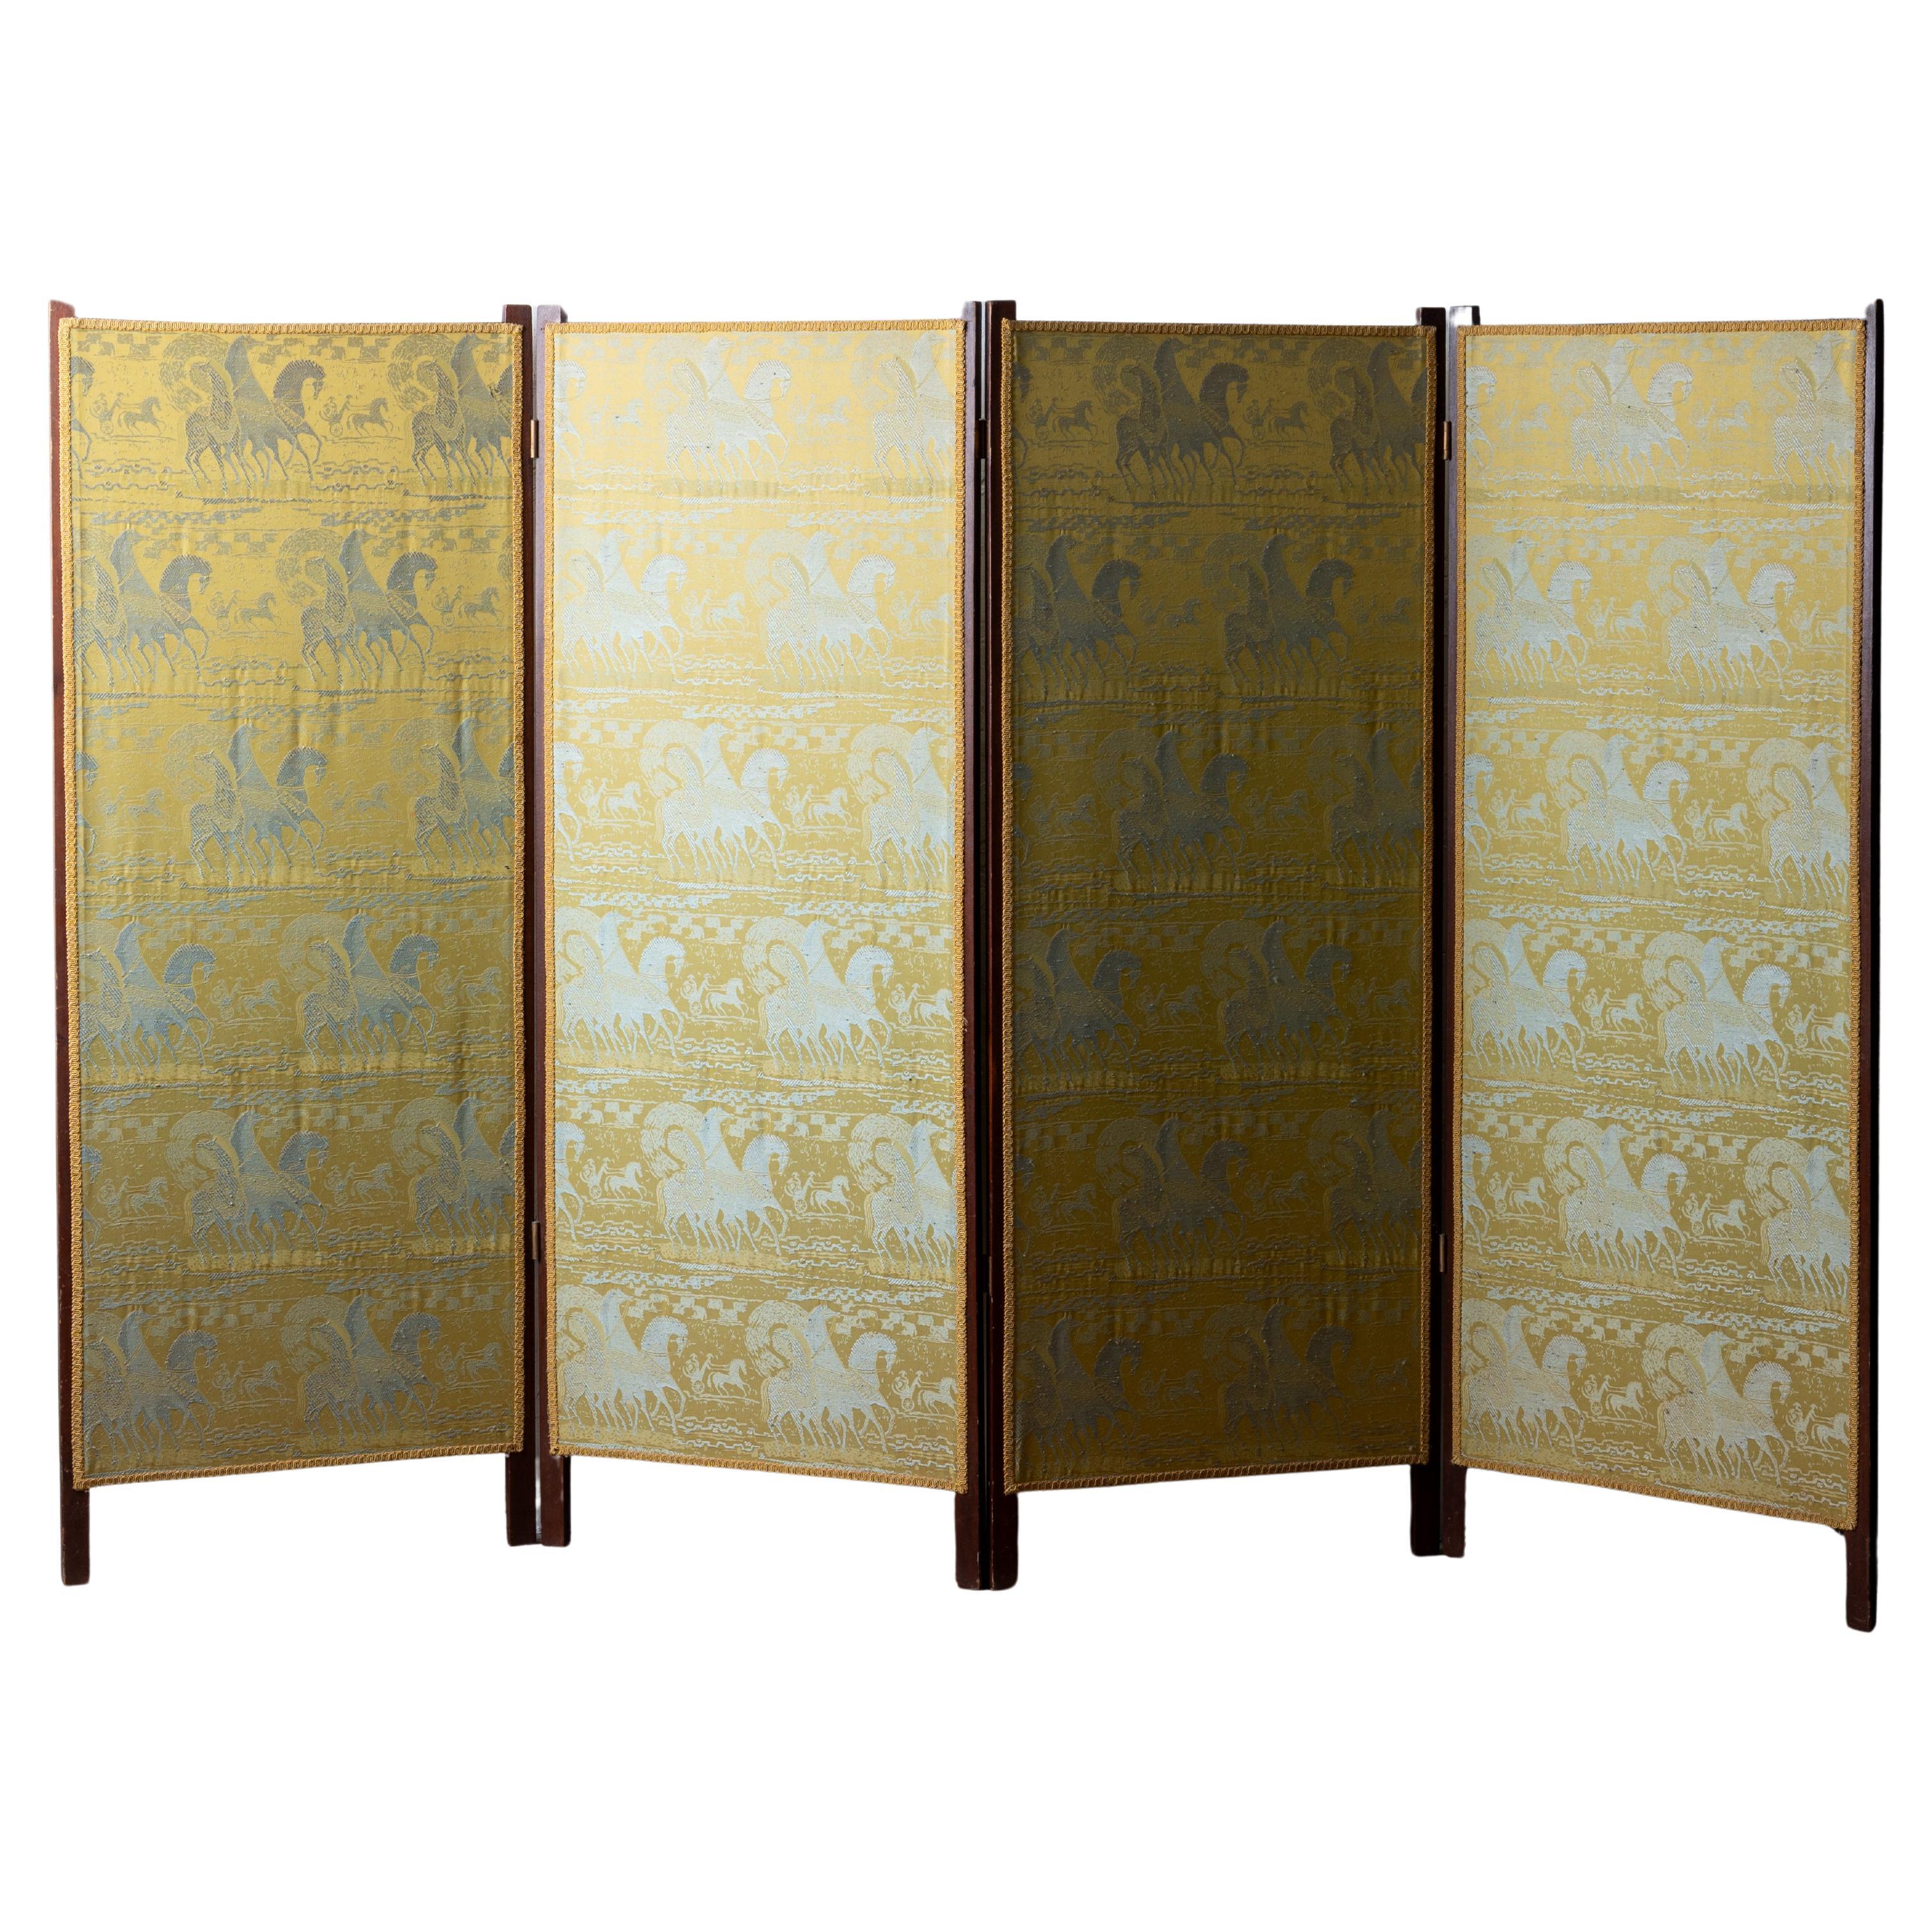 Folding Screen with Tibor Reich Etruscan Horse Fabric